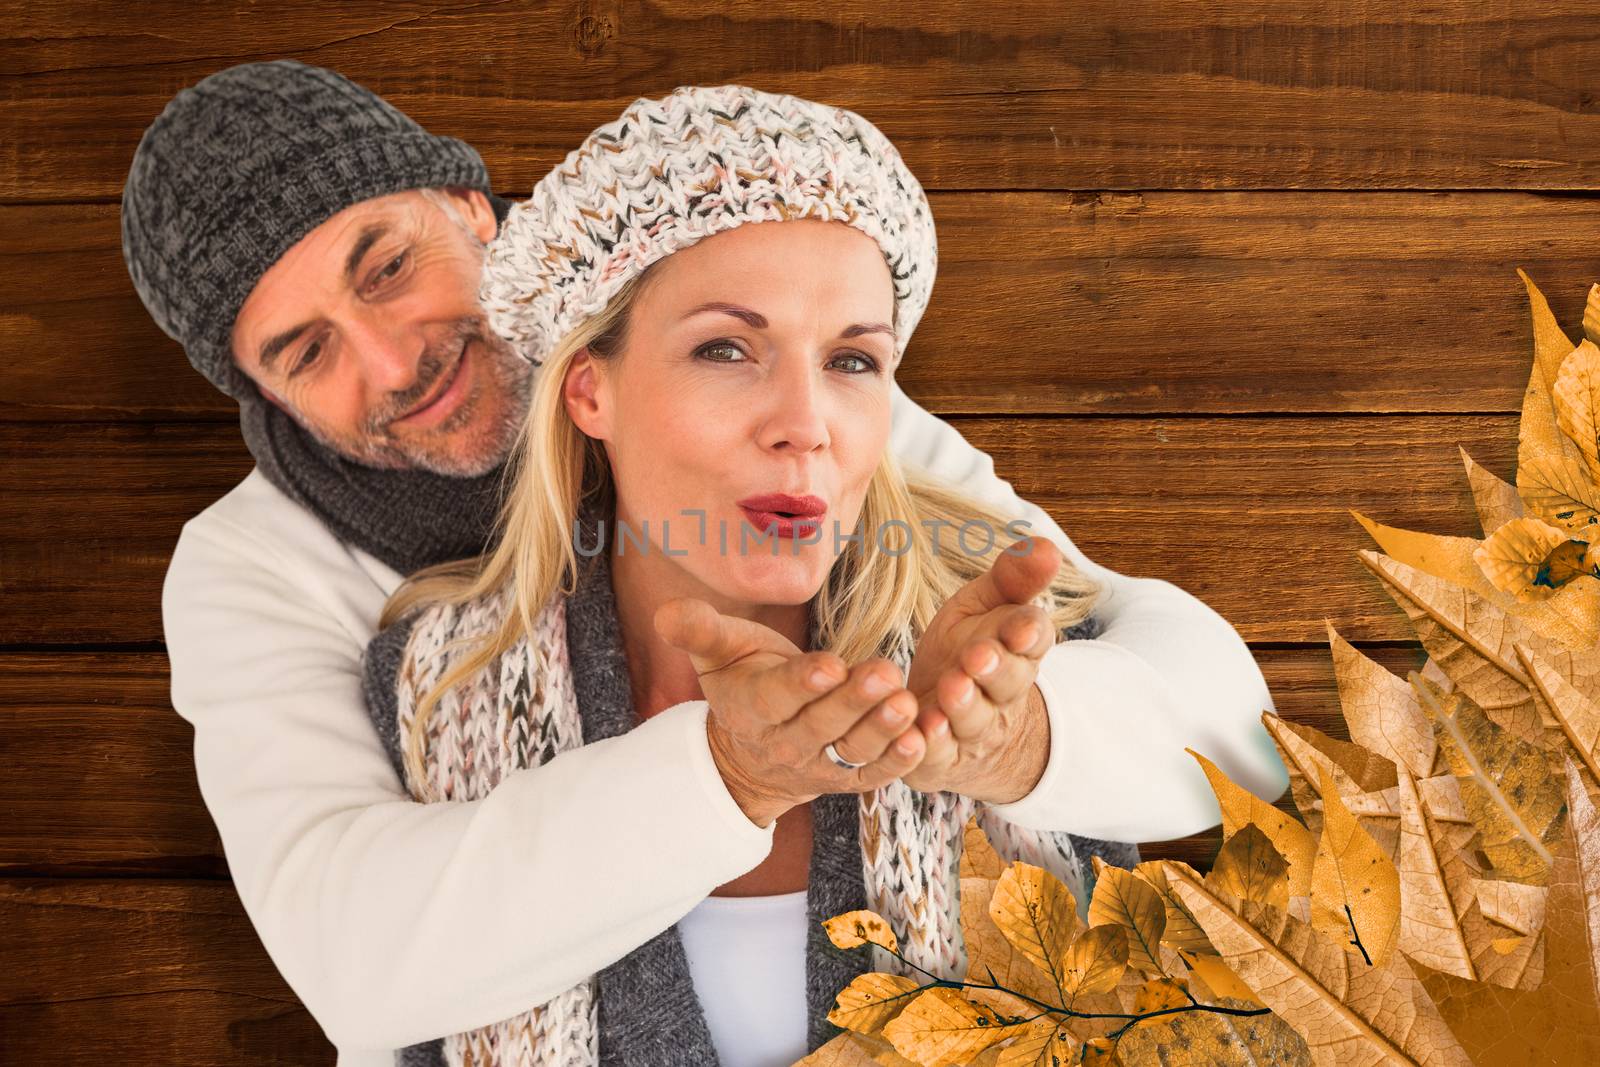 Husband hugging wife from behind as she blows kiss in air against overhead of wooden planks